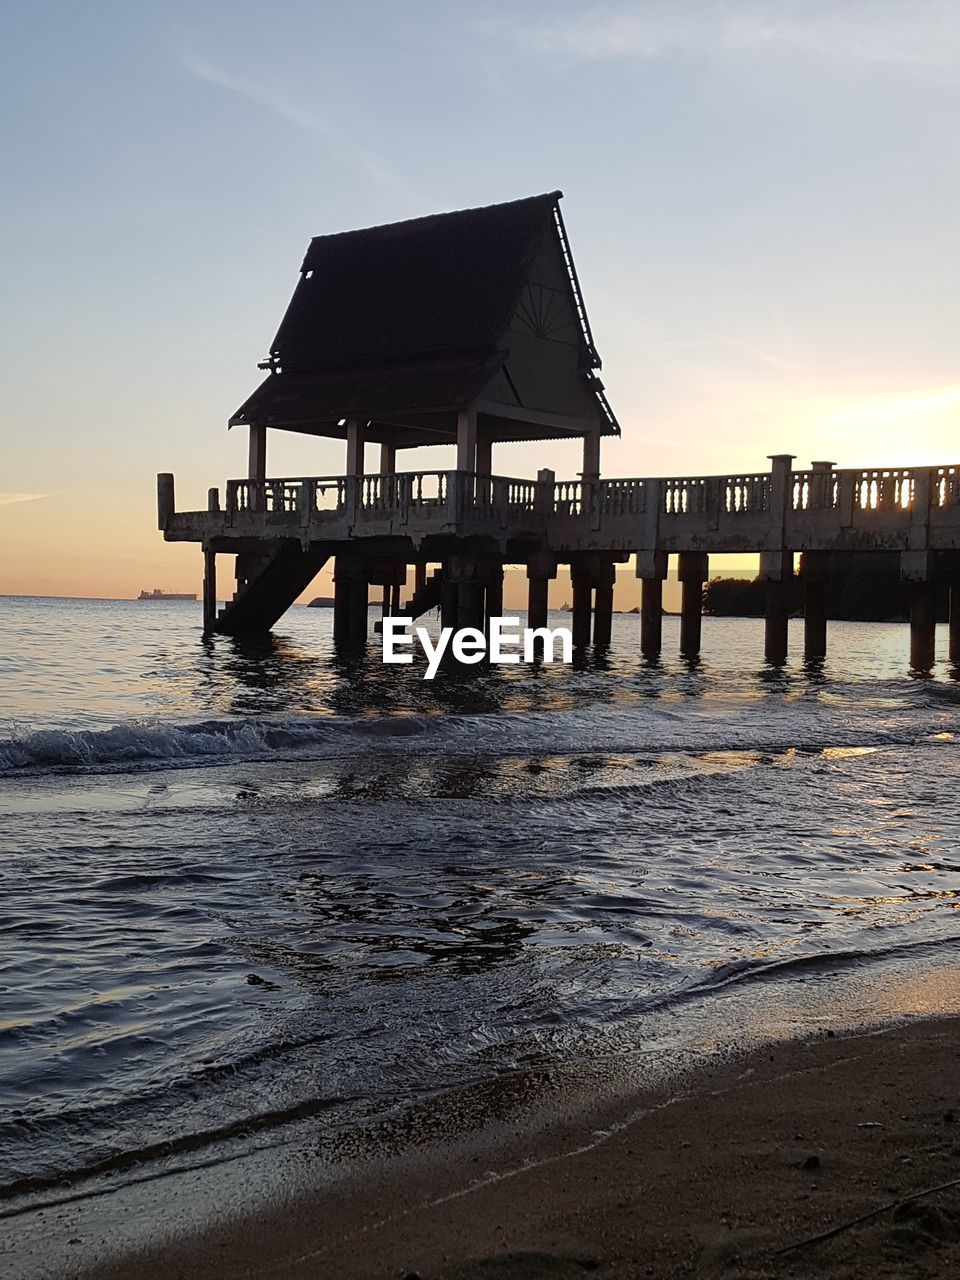 BUILT STRUCTURE ON BEACH AGAINST SKY DURING SUNSET